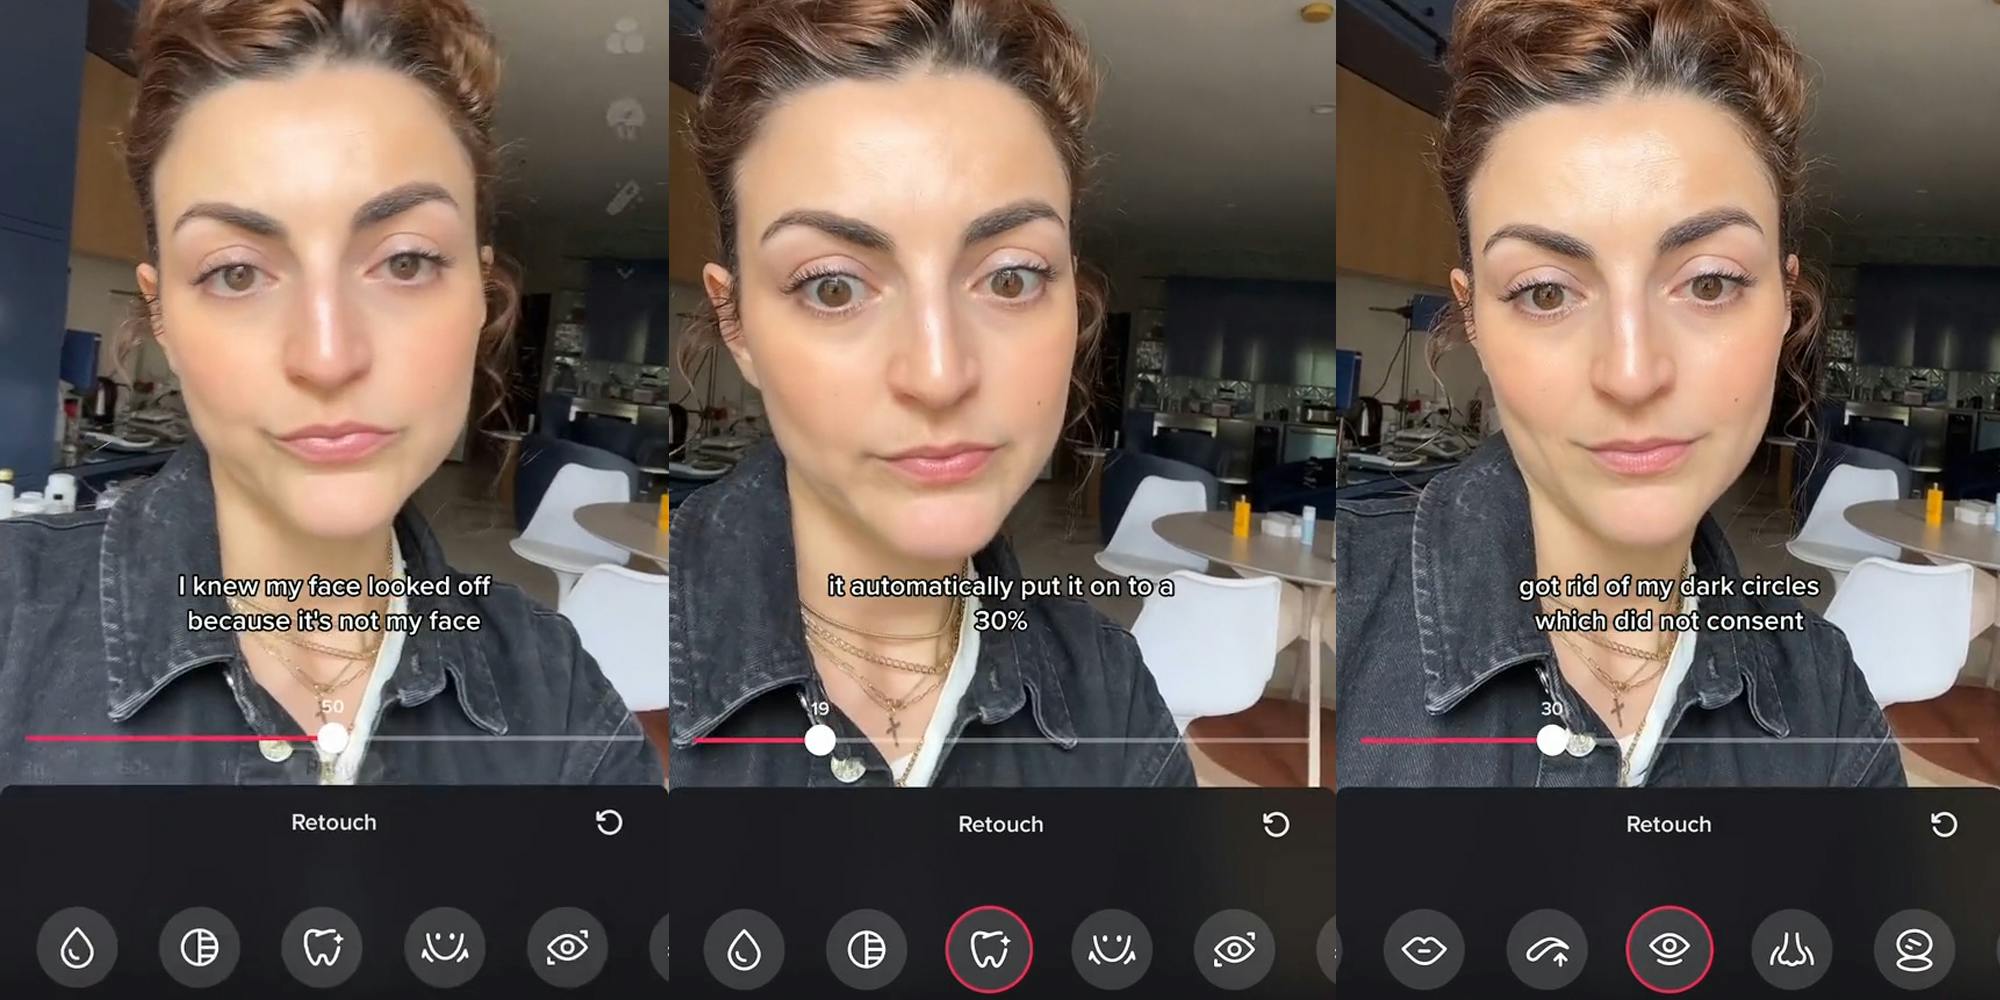 TikTok user in retouch with caption 'I knew my face looked off because it's not my face' (l) TikTok user in retouch with caption 'it automatically put it on to a 30%' (c) TikTok user in retouch with caption 'got rid of my dark circles which did not consent' (r)